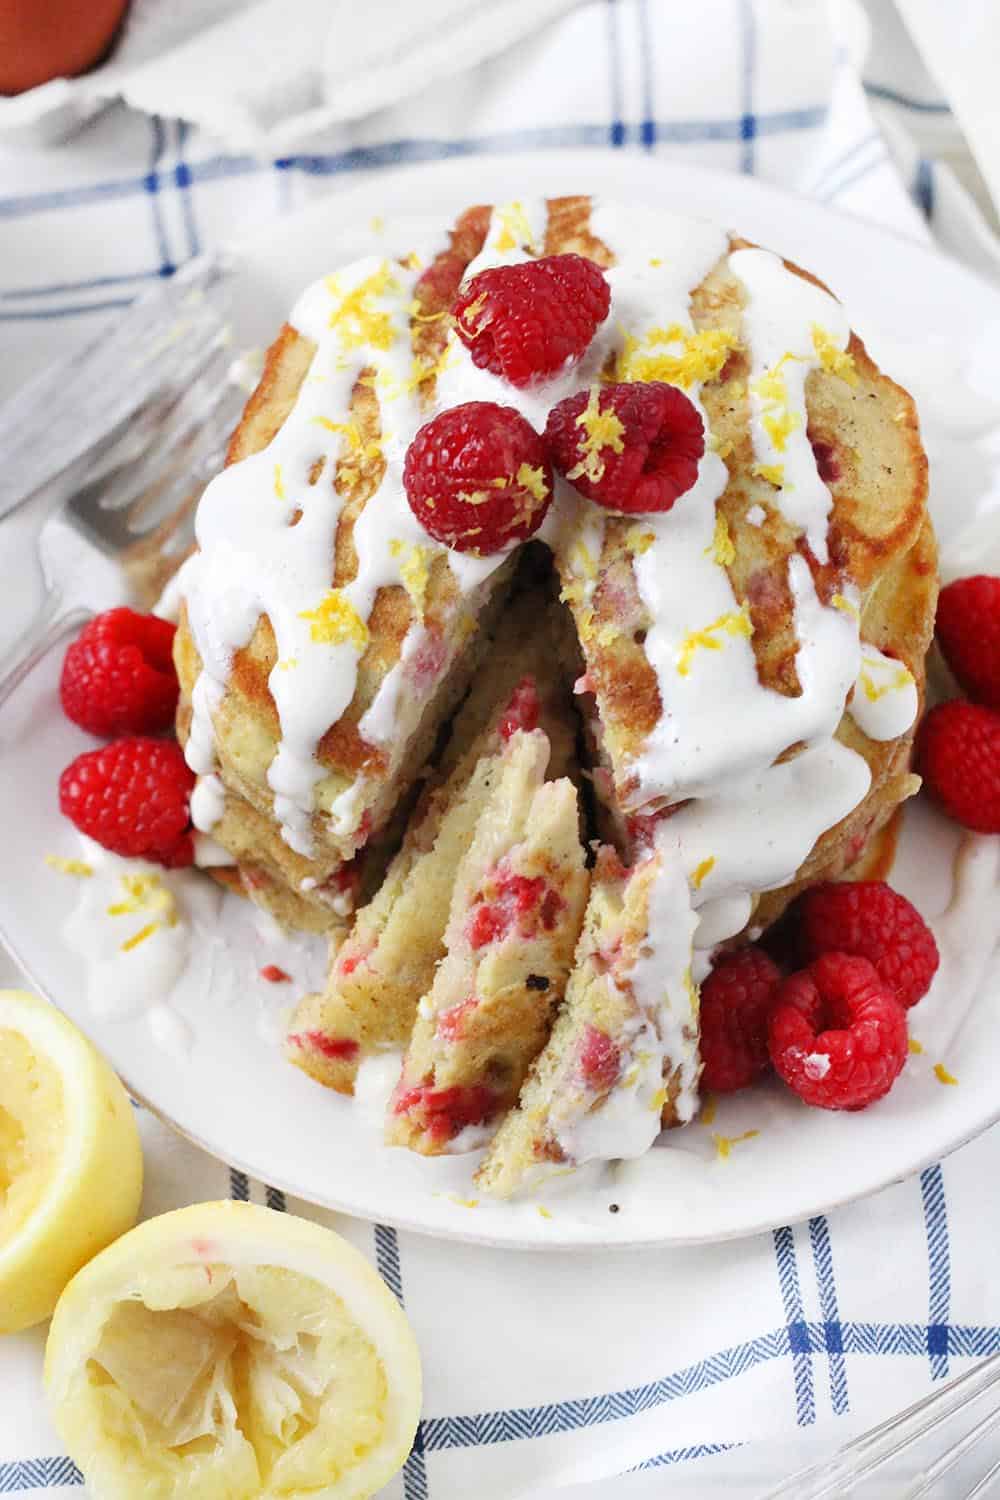 These refined sugar free Lemon Raspberry Pancakes are topped with a creamy Maple Cream Cheese Drizzle. They are light and tart and fluffy- and the red and yellow colors are so pretty! This is the perfect weekend breakfast recipe.